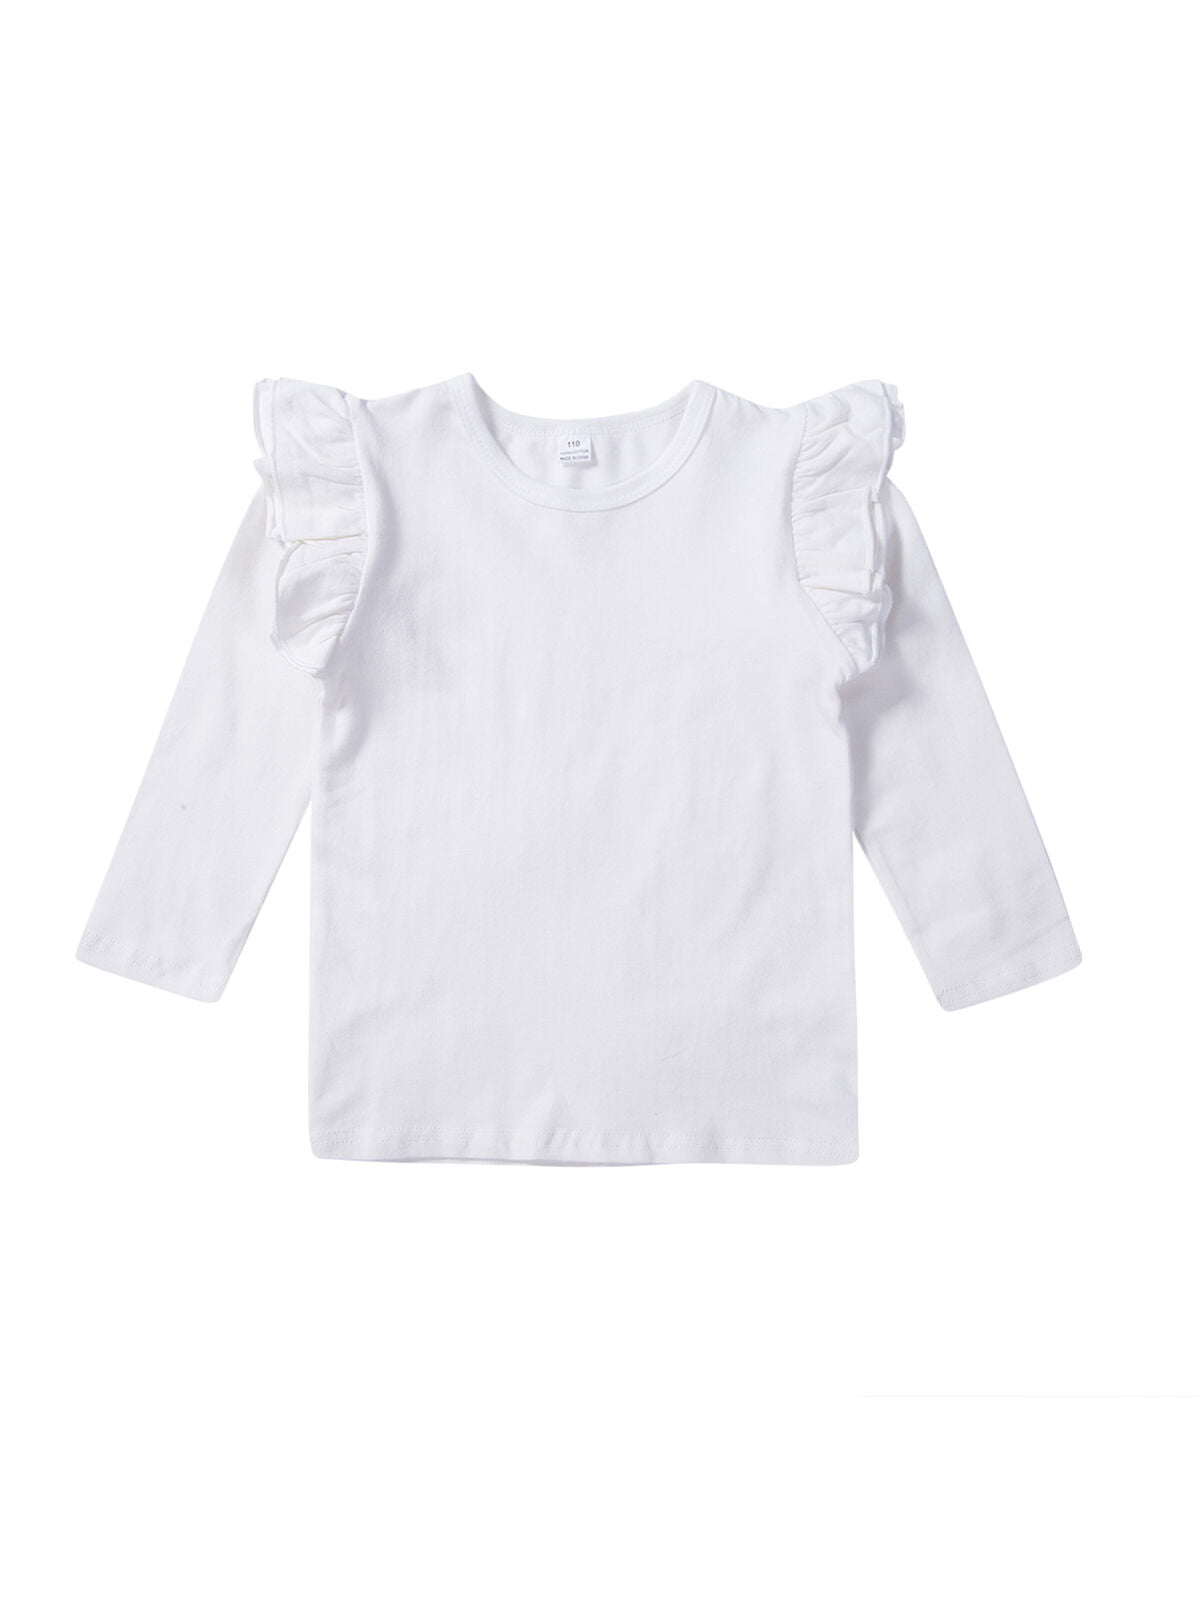 Baby Girls Spring Autumn Round Neck V Ruffle Top Blouses Long Sleeve Toddler Cute Casual Tops